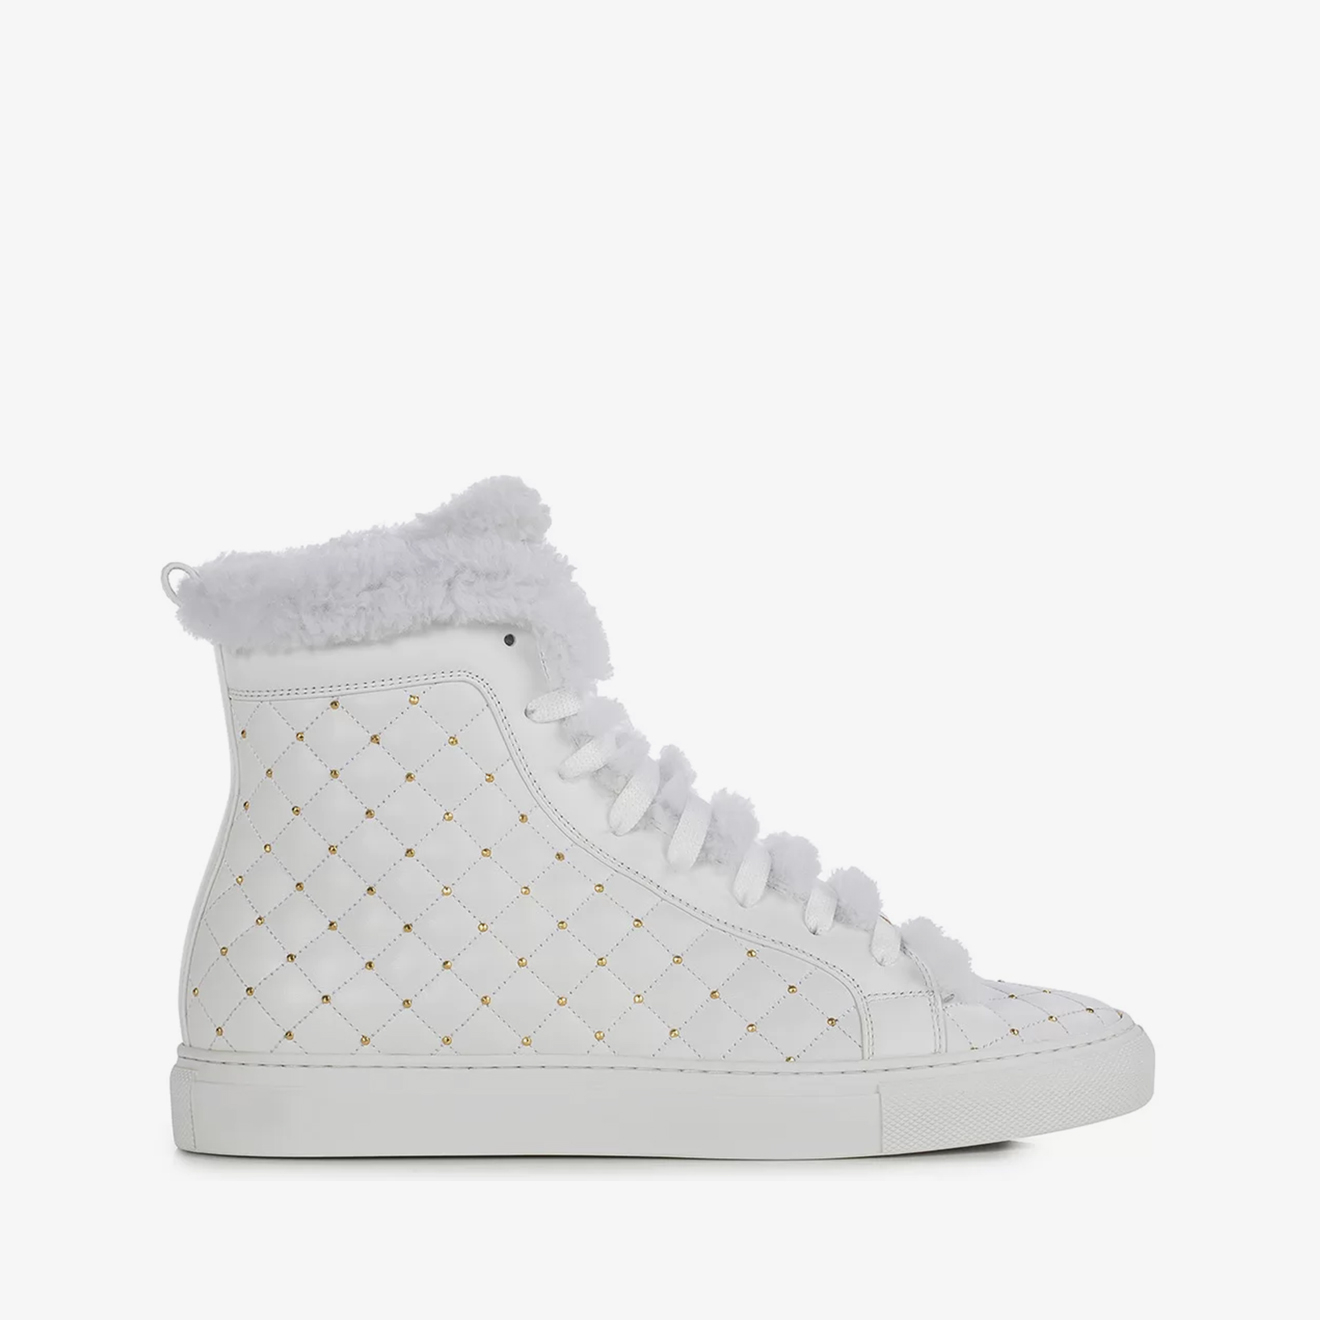 KATE SNEAKER fur inner lining - Le Silla official outlet